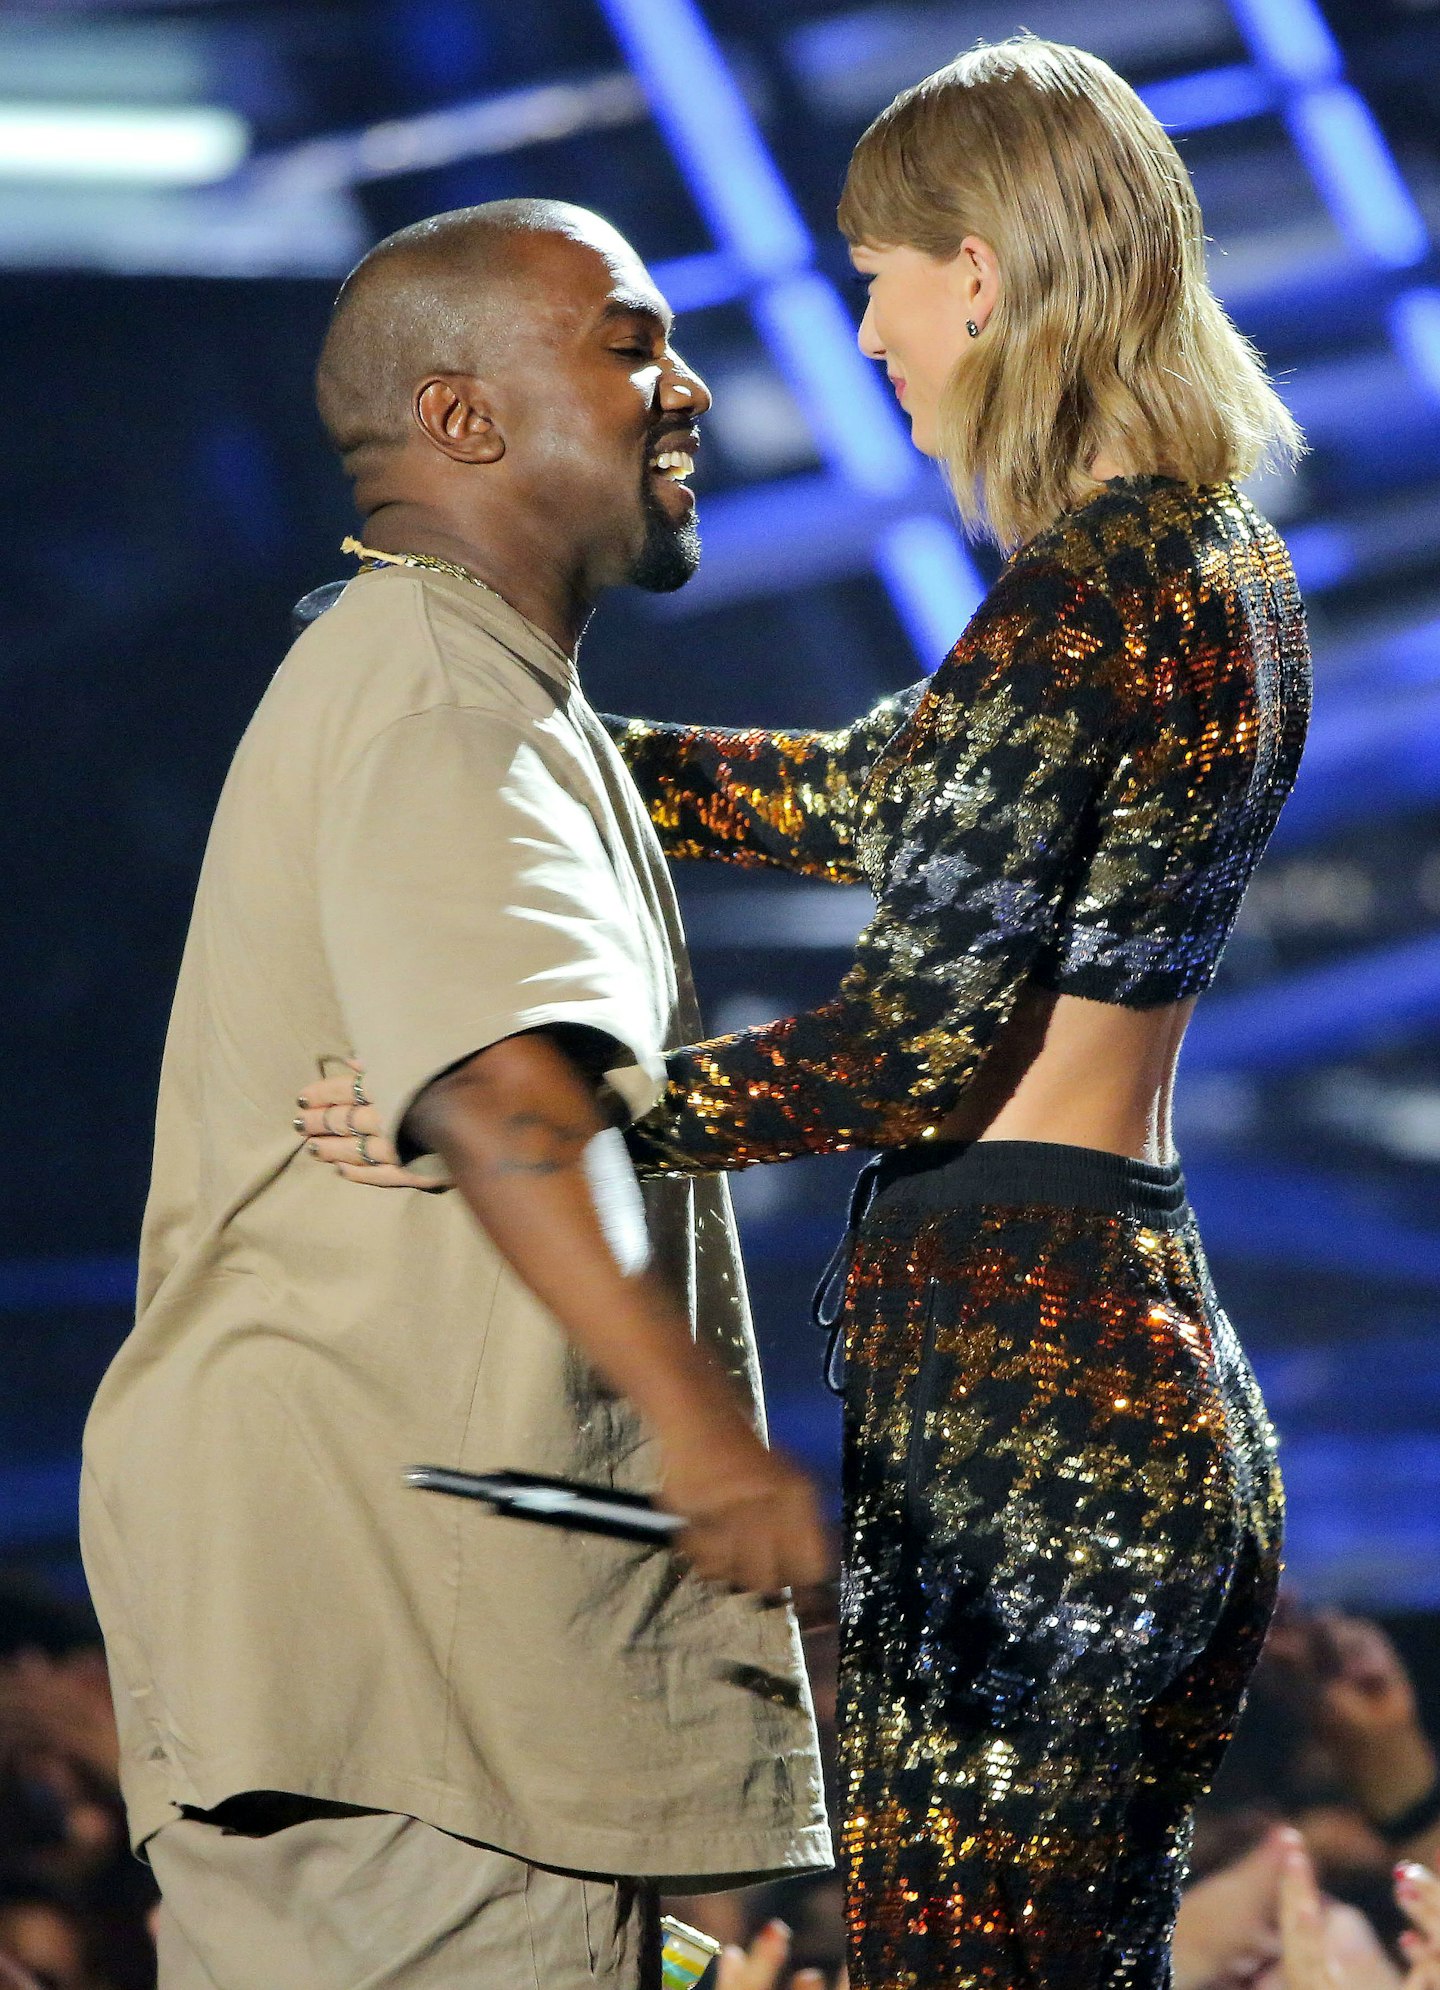 kanye west and taylor swift